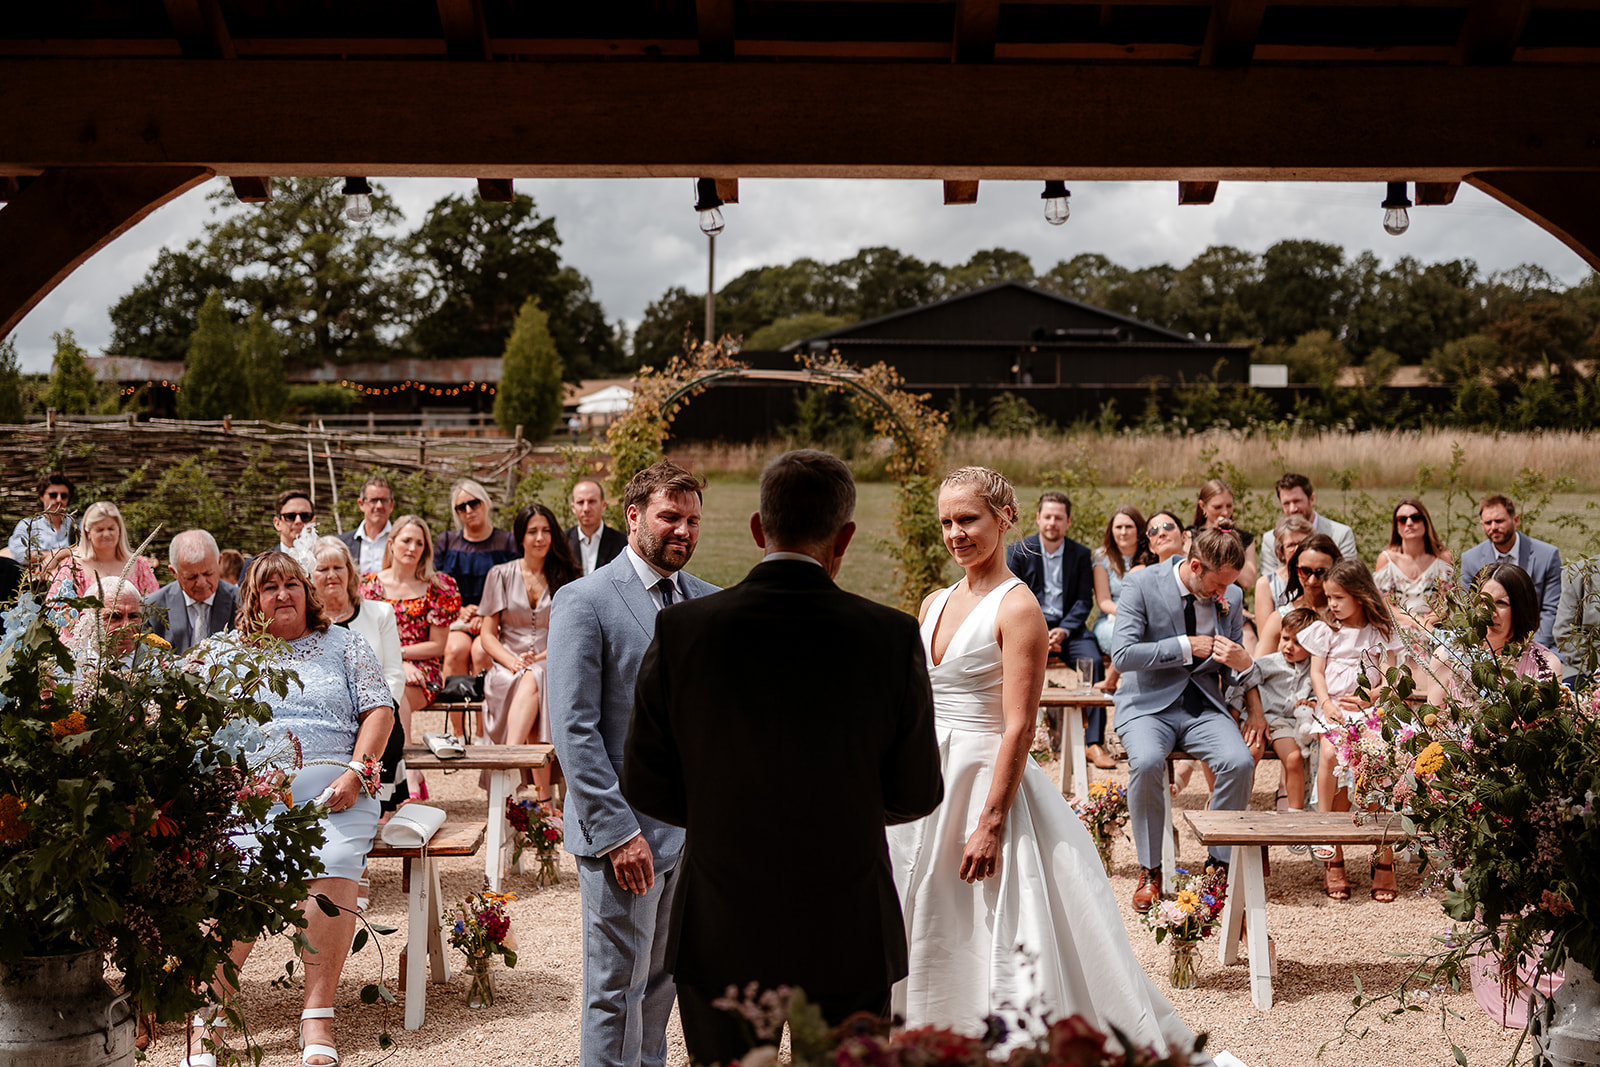 View of the outdoor wedding ceremony from behind the officiant looking at the couple and their guests at Silchester Farm